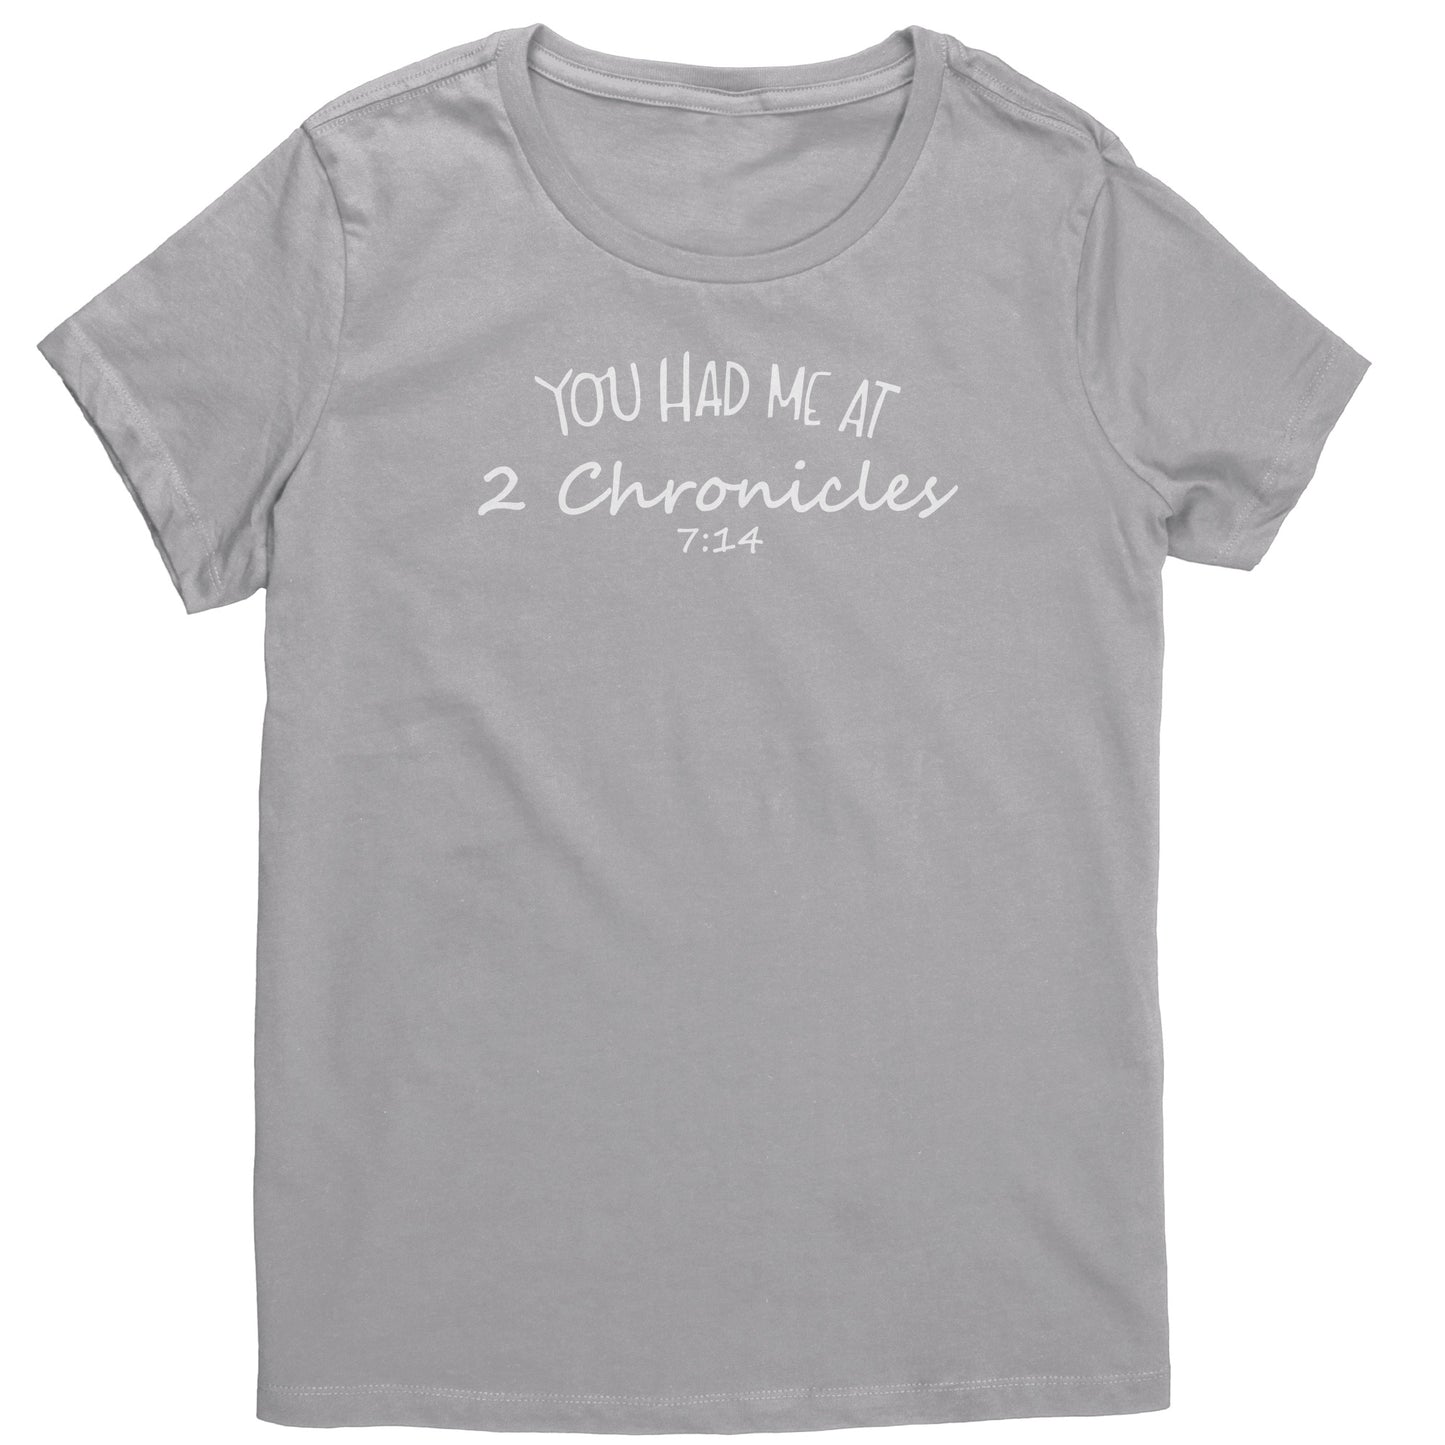 You Had Me At 2 Chronicles 7:14 Women's T-Shirt Part 2